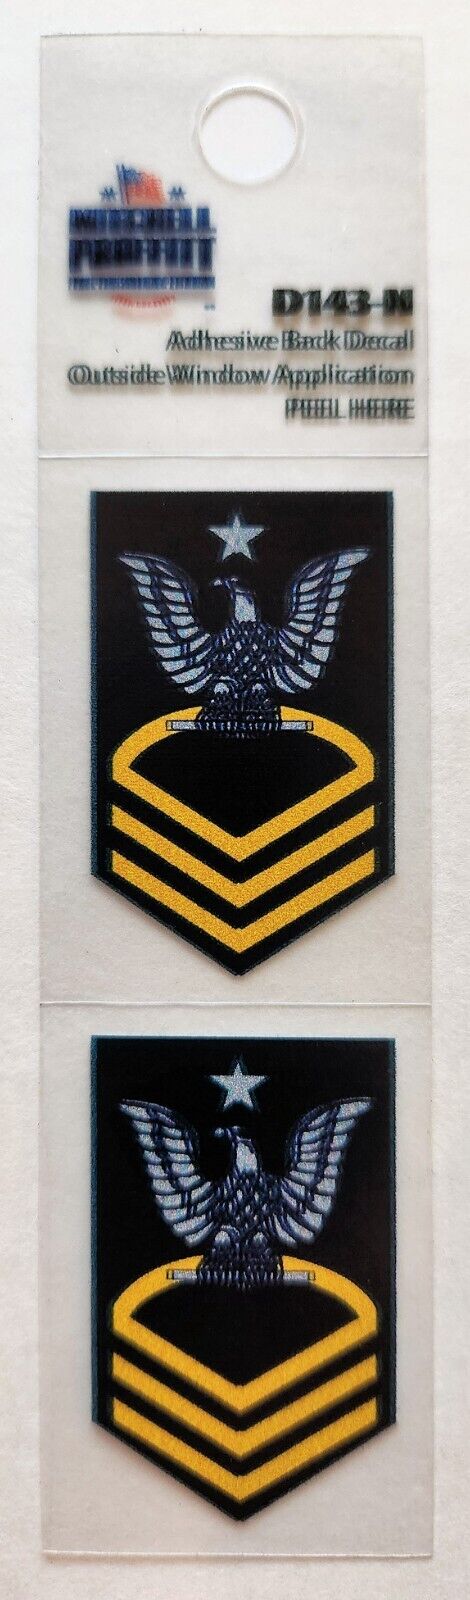 US NAVY SENIOR CHIEF PETTY OFFICER SET OF 2 SMALLER STICKERS - MADE IN THE USA